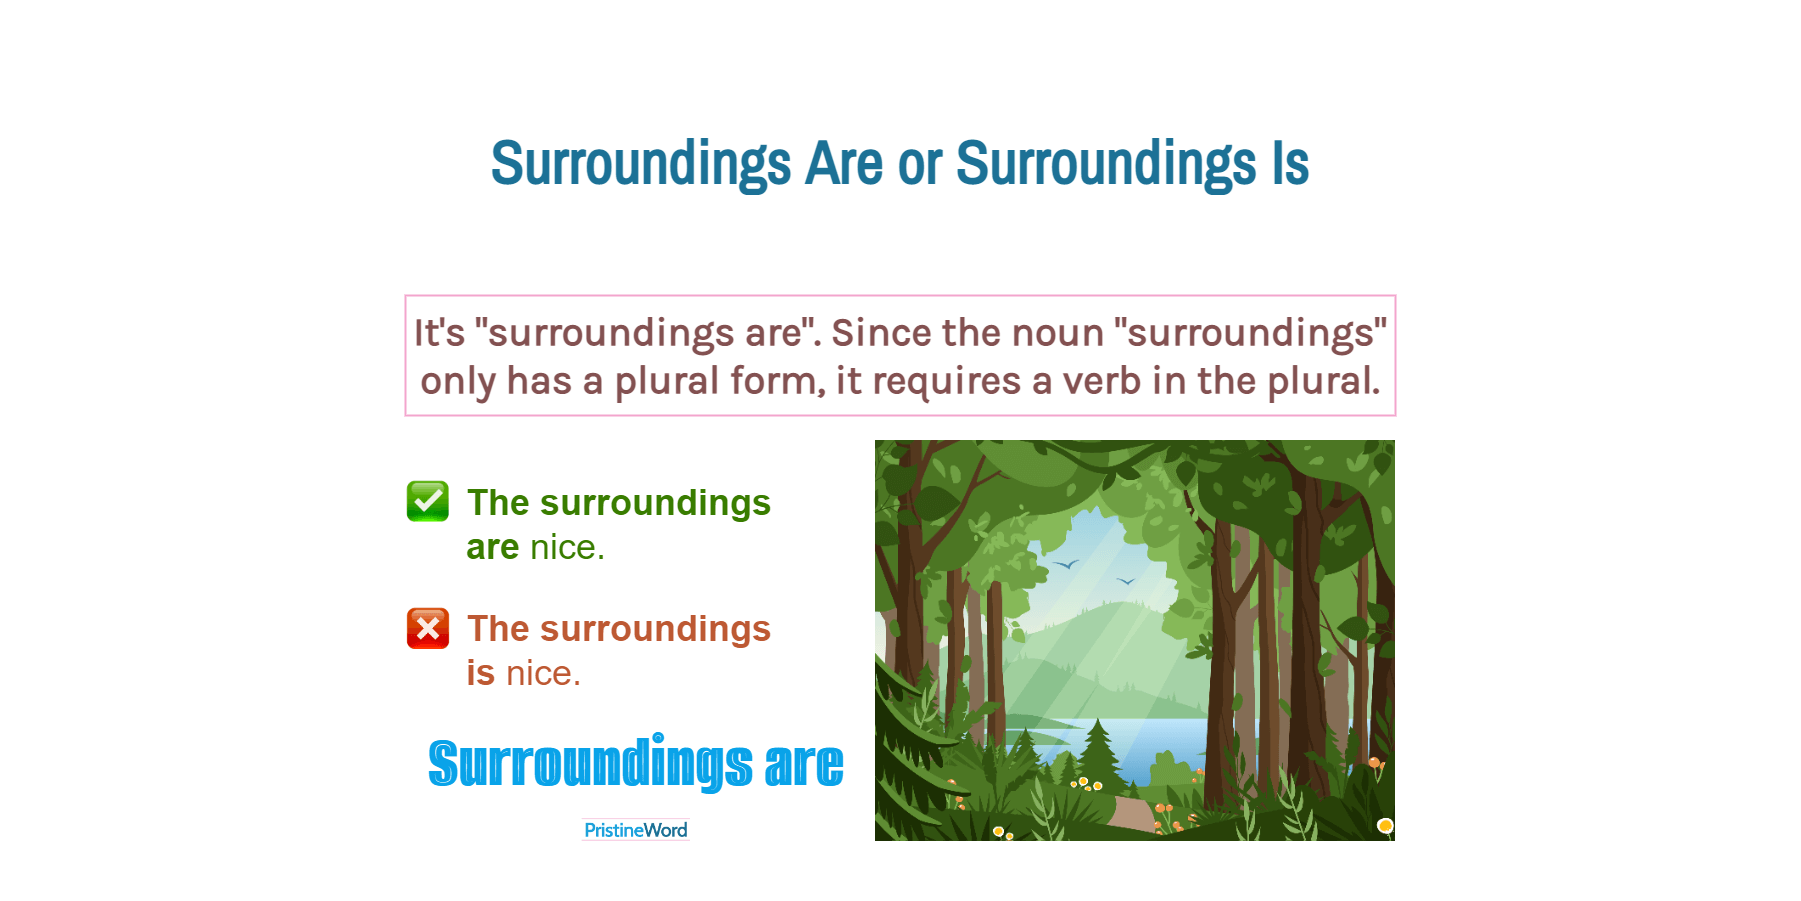 Surroundings Is or Surroundings Are